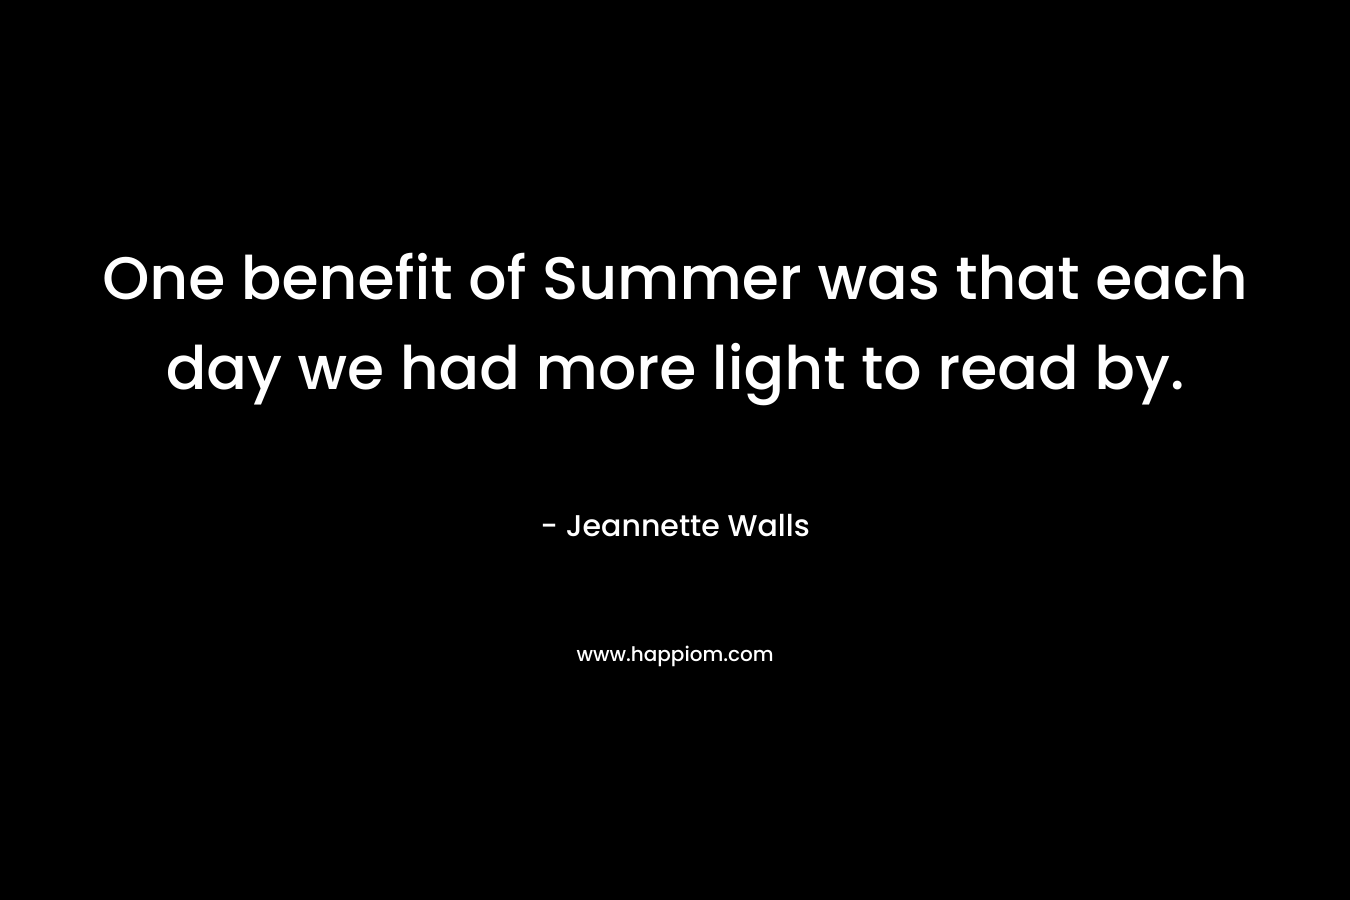 One benefit of Summer was that each day we had more light to read by. – Jeannette Walls